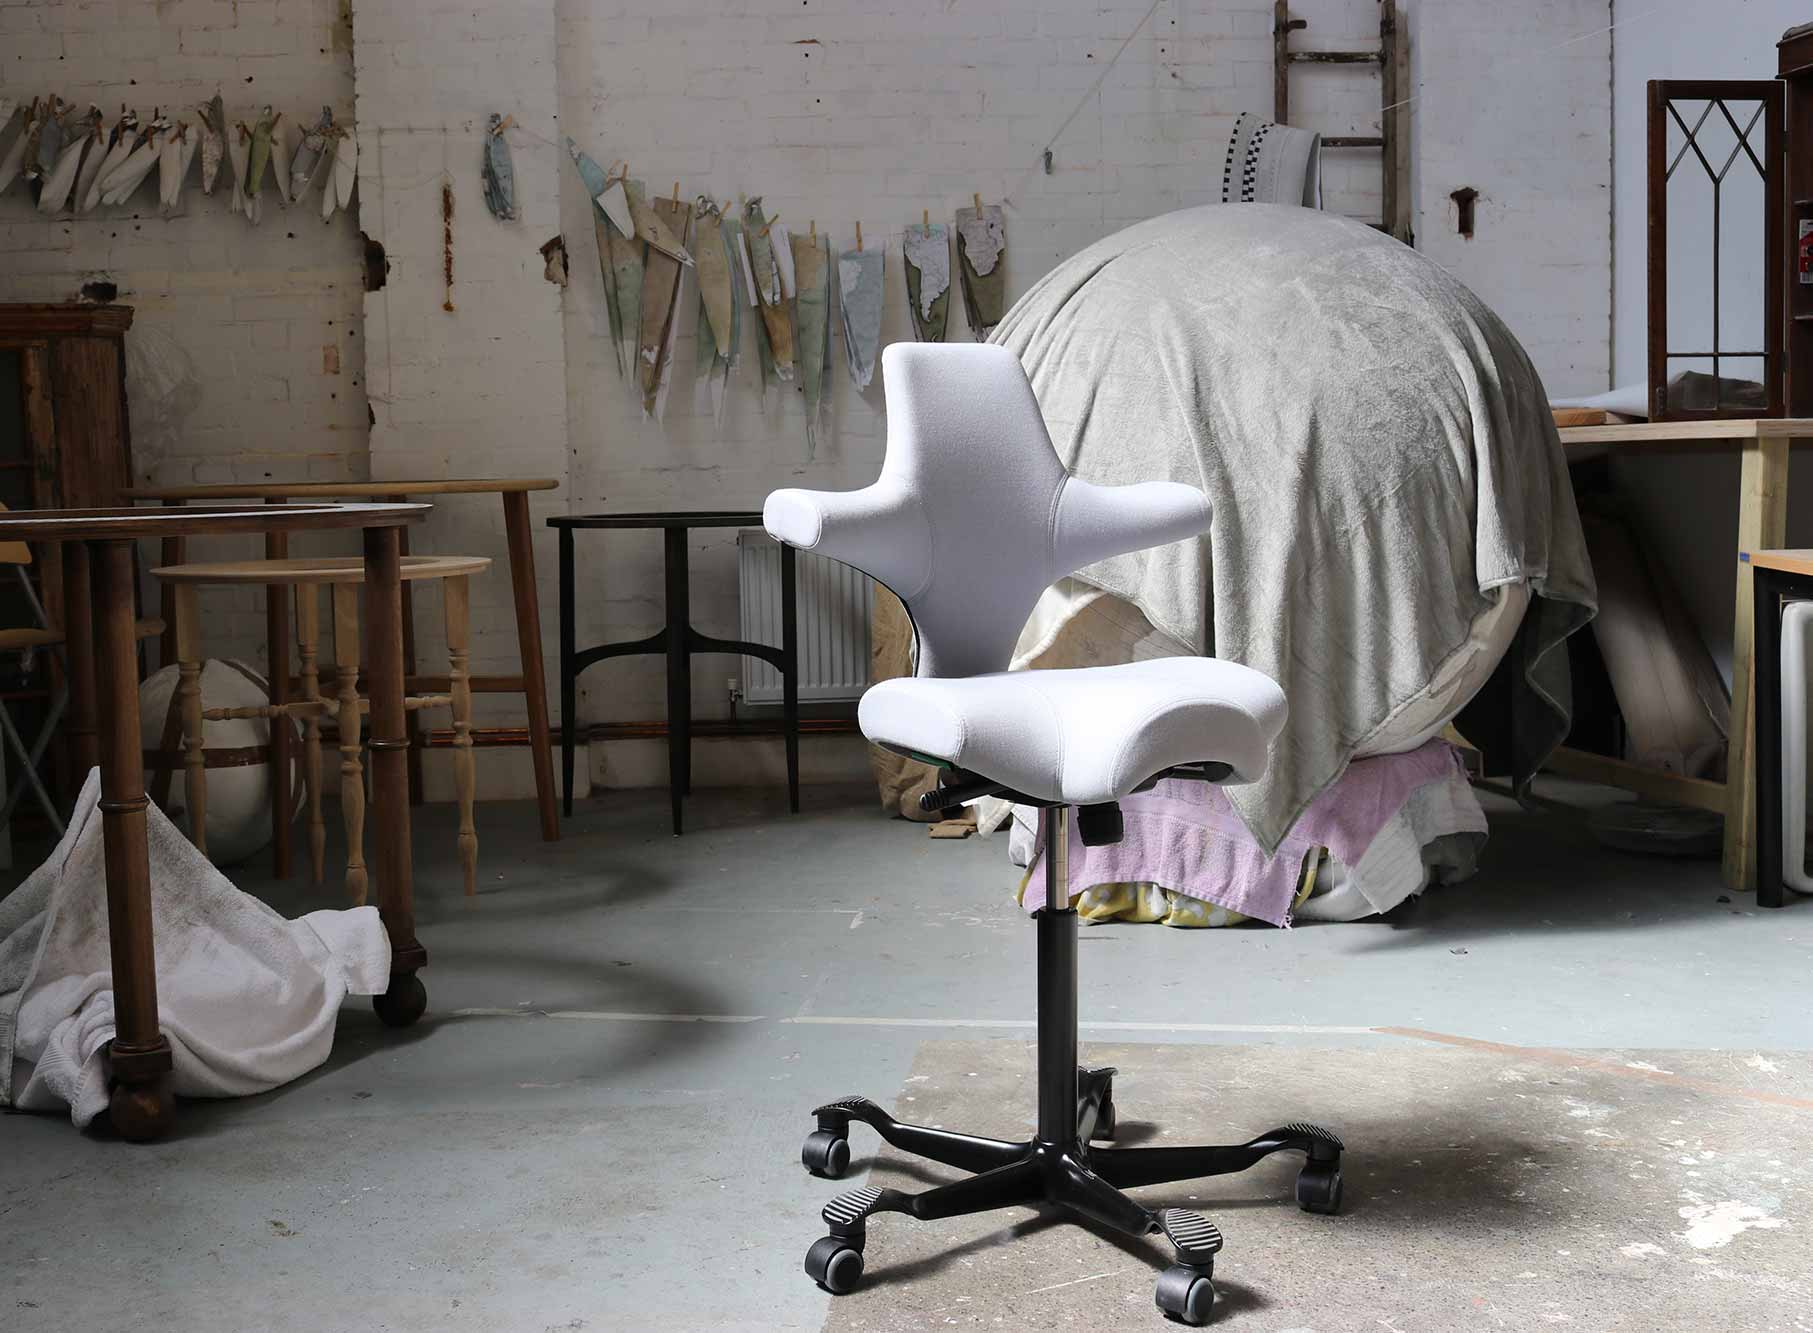 Grey HÅG Capisco chair in bellerby & co workshop with giant globew covered in a cloth in the background